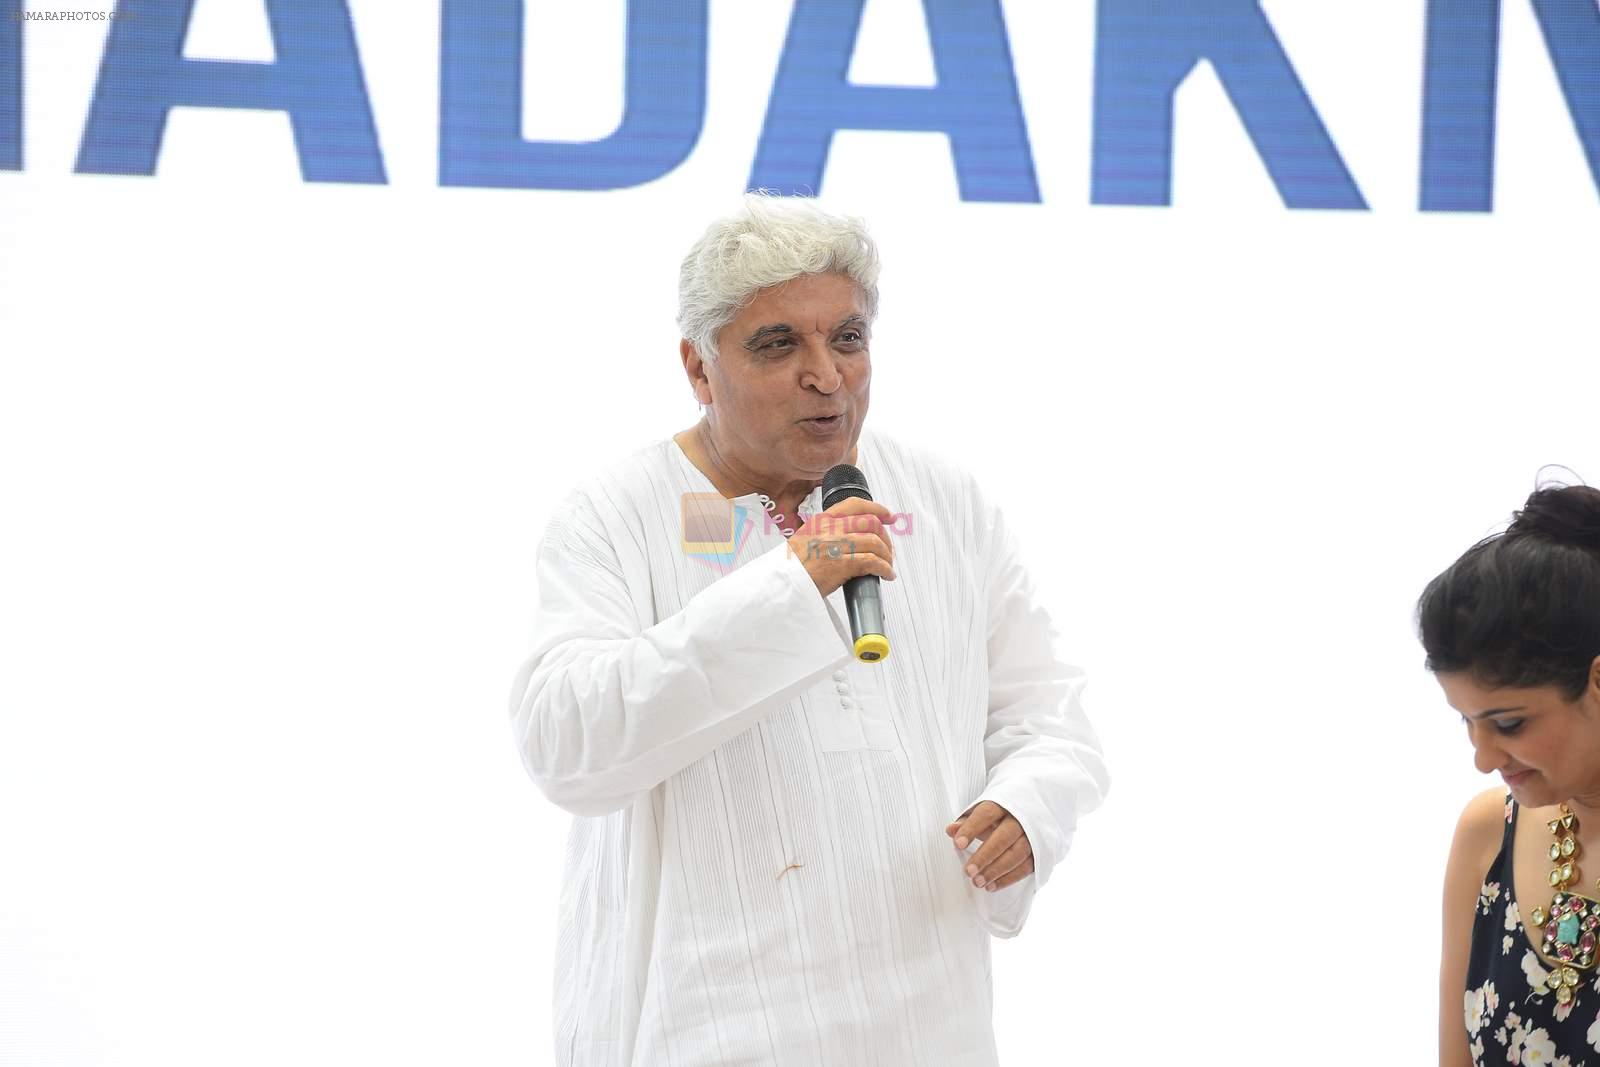 Javed Akhtar at Dil Dhadakne Do music launch in Mumbai on 3rd May 2015